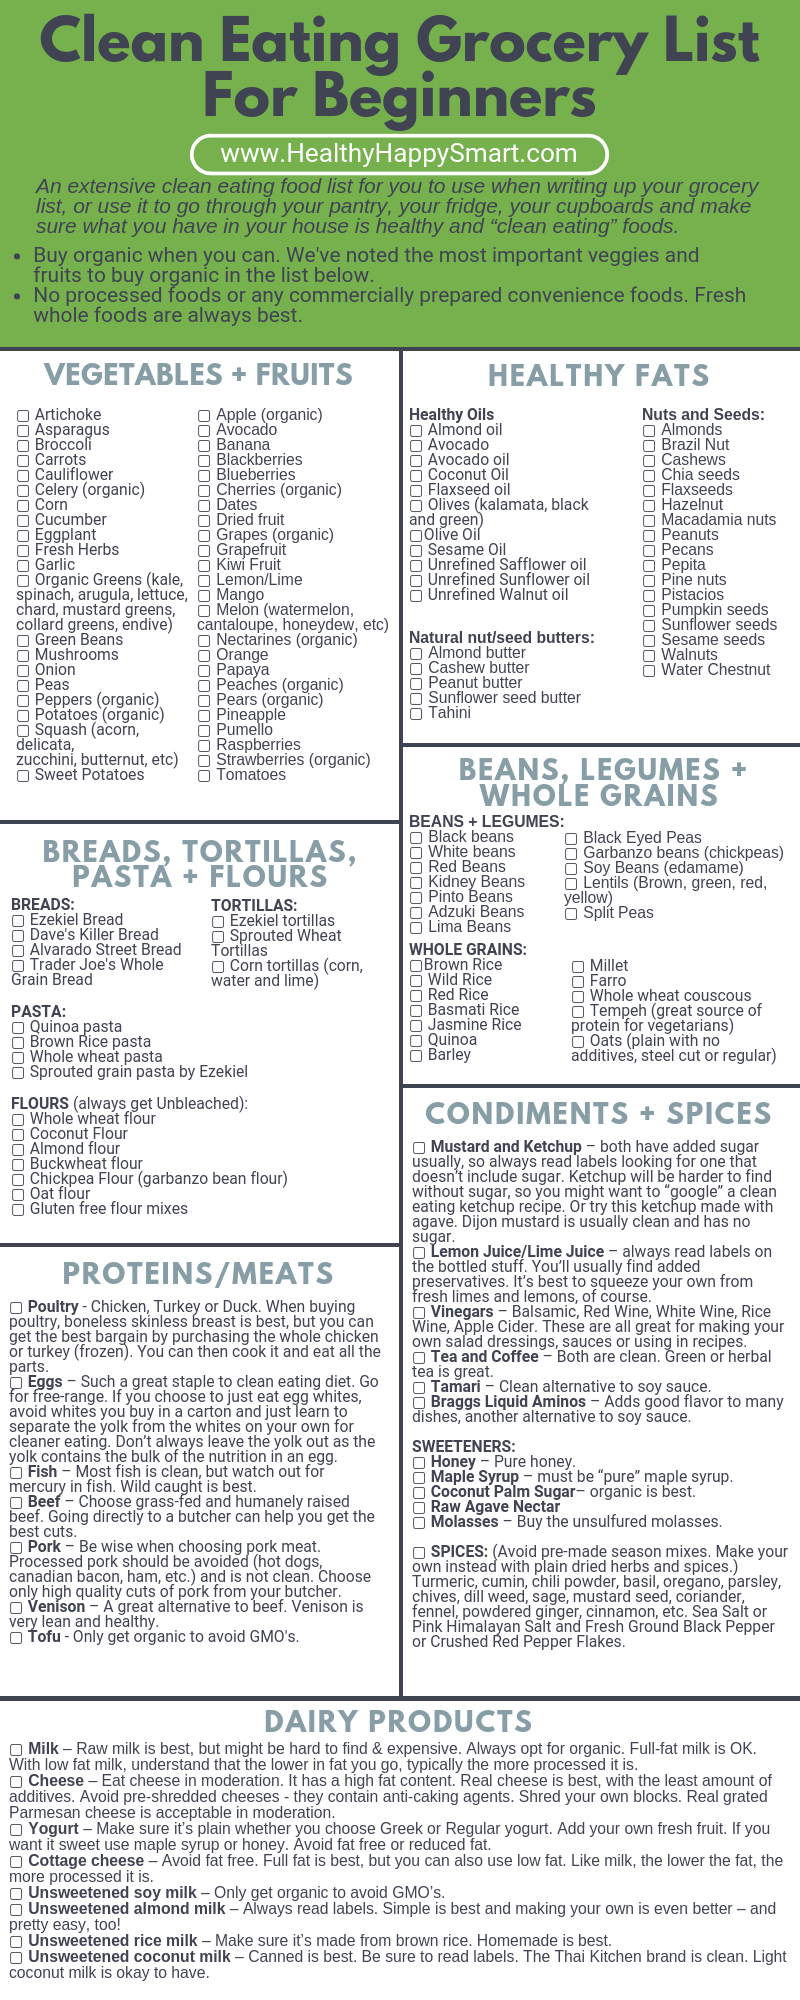 19 fitness Diet clean eating ideas